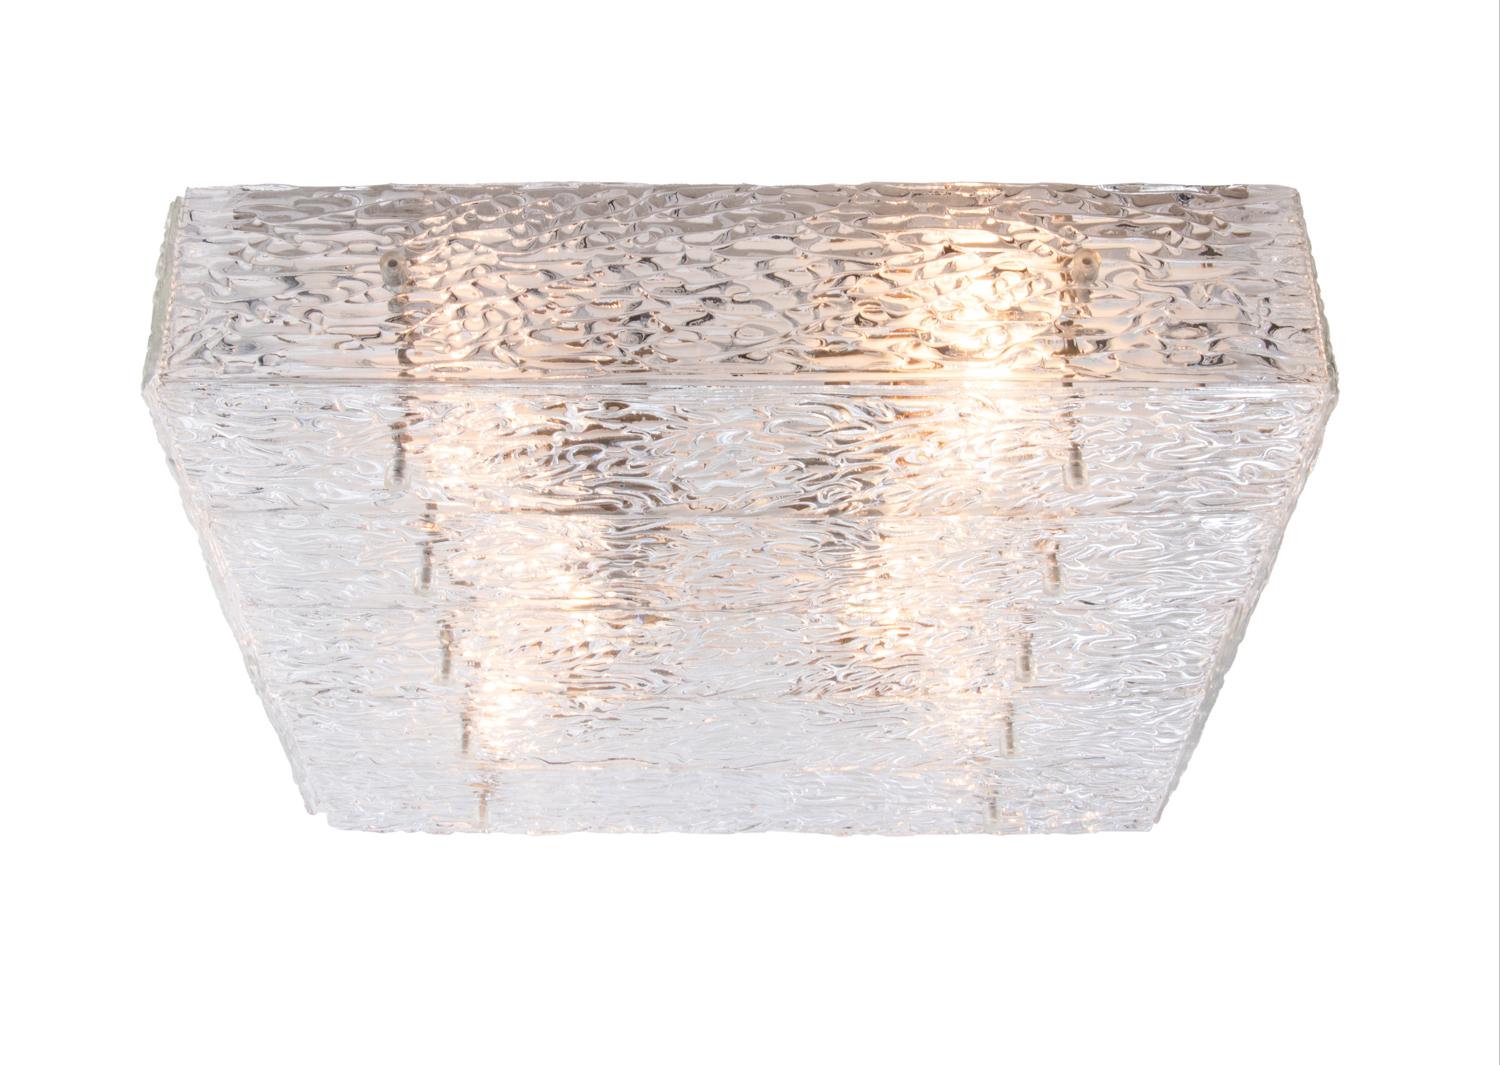 Elegant large square mid-century ceiling lamp 'Heidelberg 52' executed 1974 by Kalmar, Vienna in Austria. To use as a ceiling light but also as a wall sconce. Made of solid textured glass on a white nickel frame. Has 6 sockets. In very good